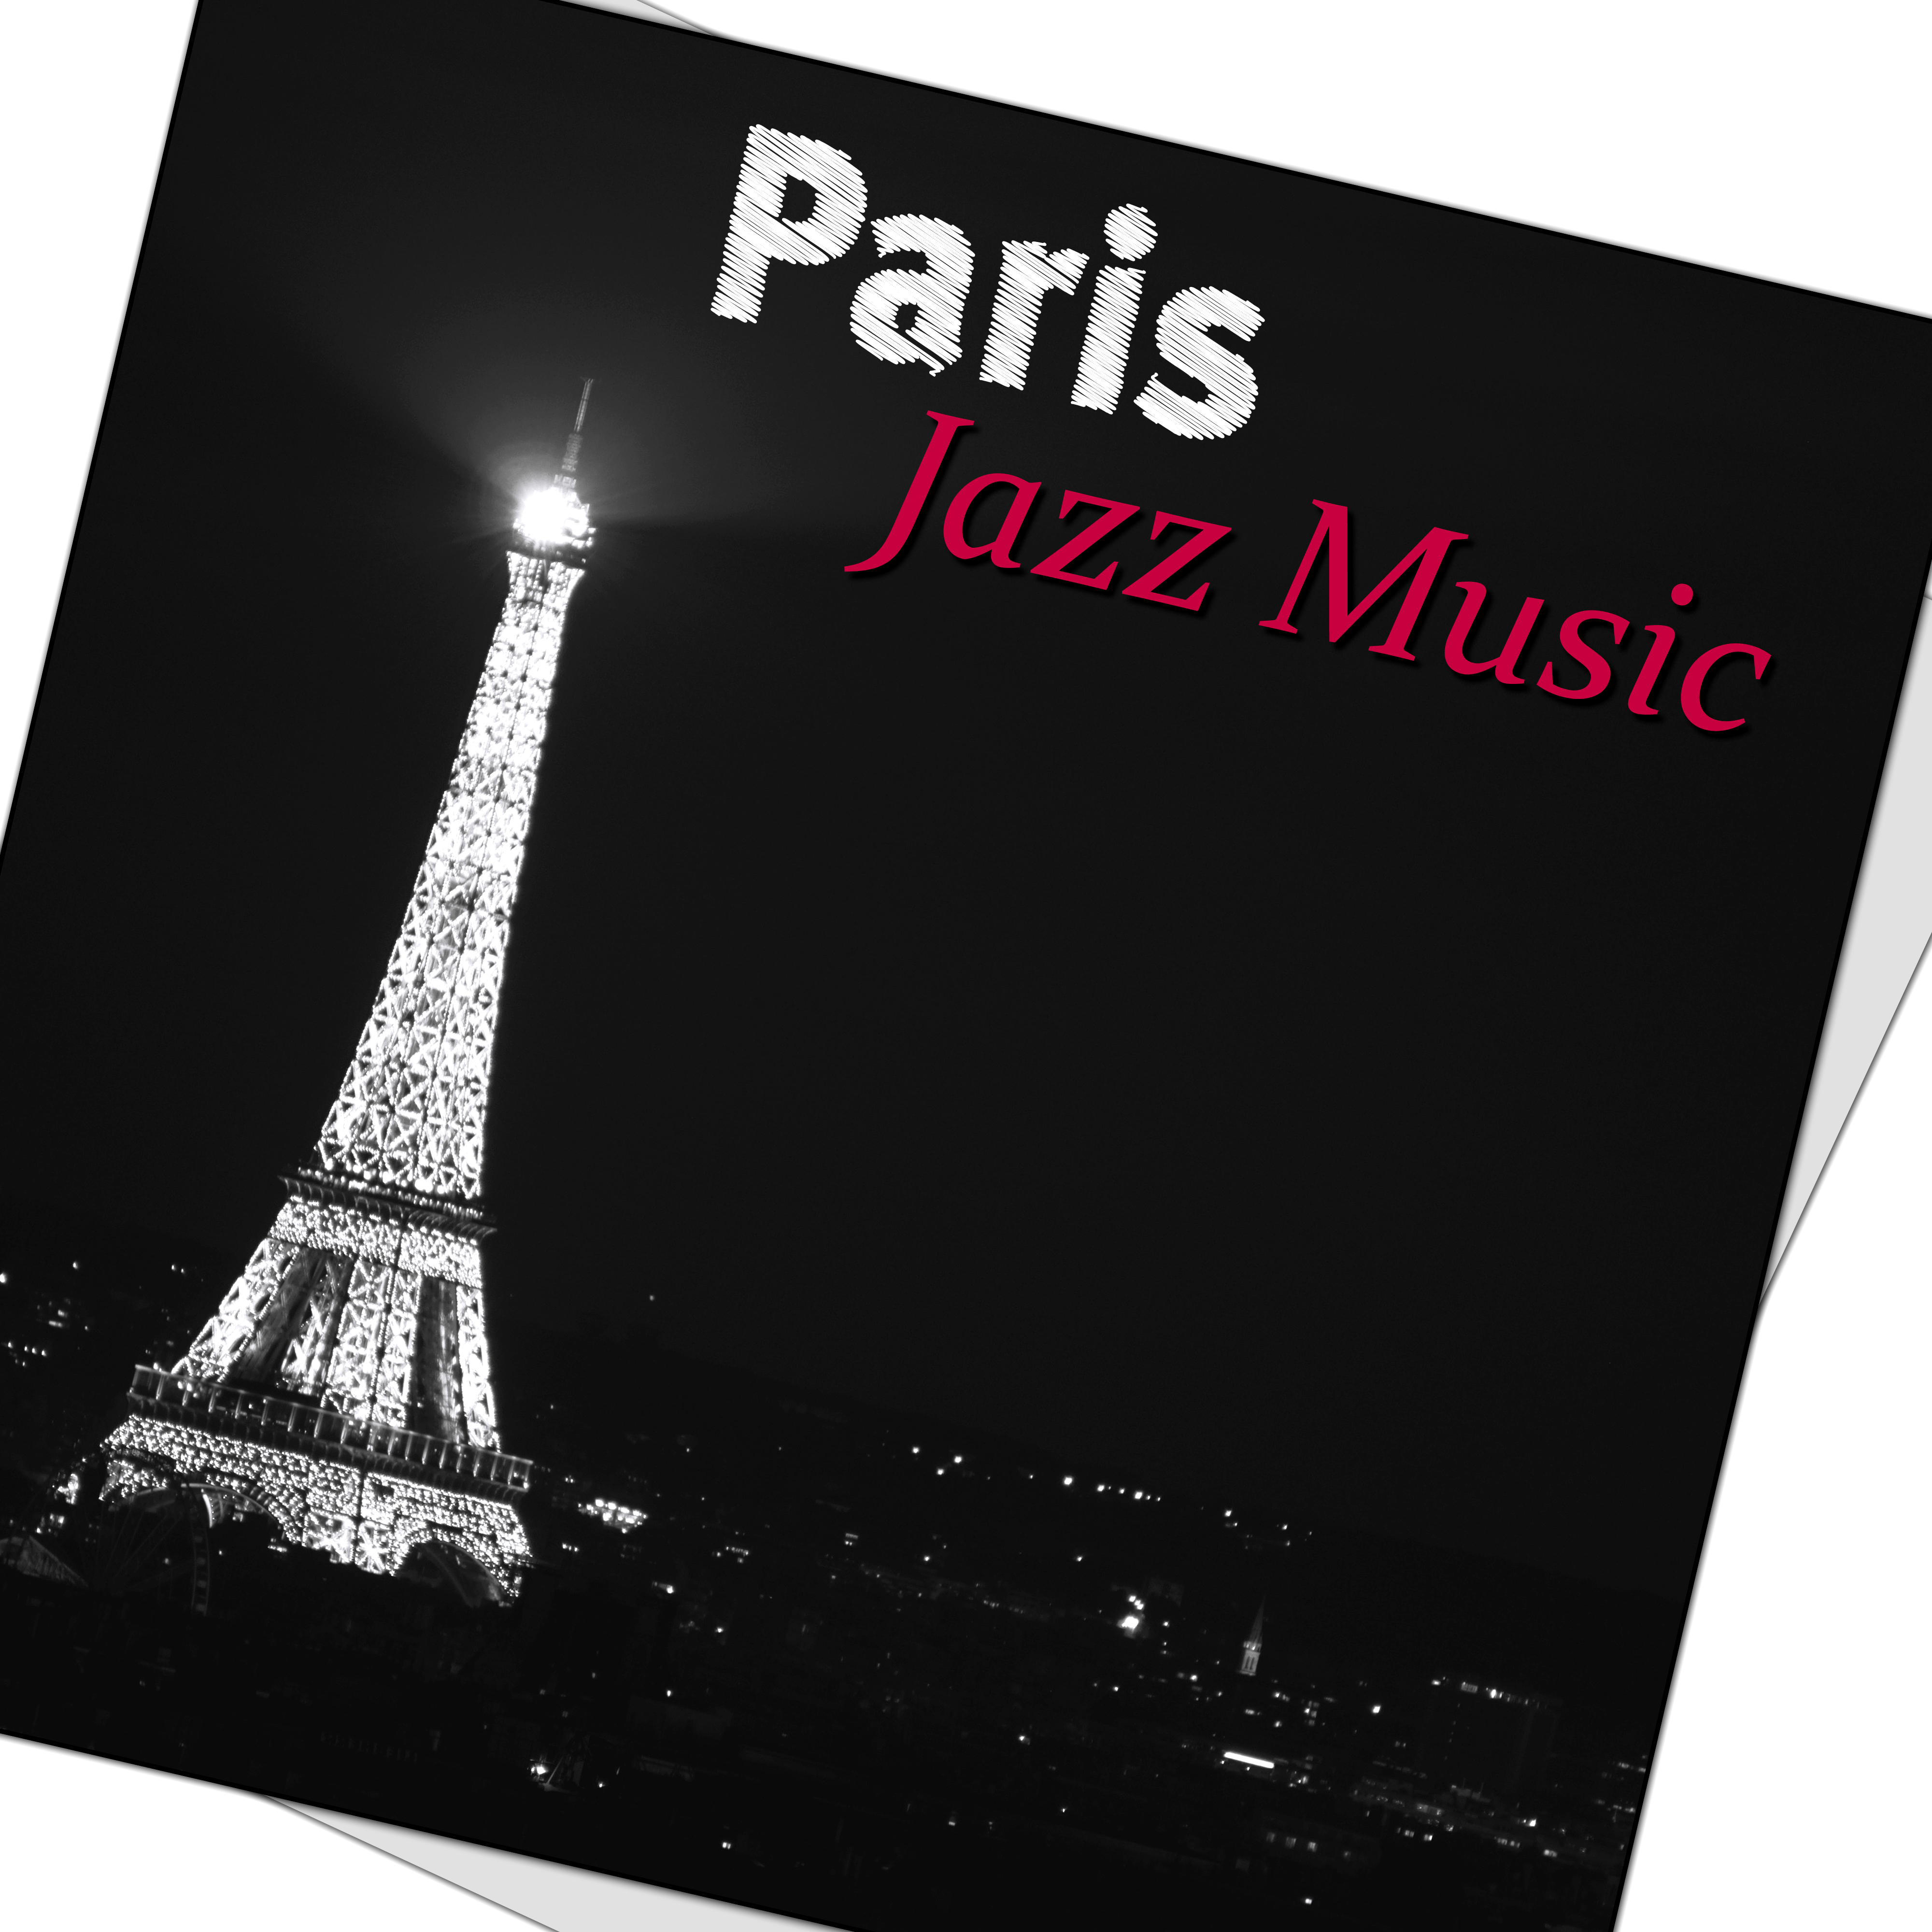 Paris Jazz Music - Cocktail Party **** Music, Romantic Dinner & Intimate Moments, Background Music